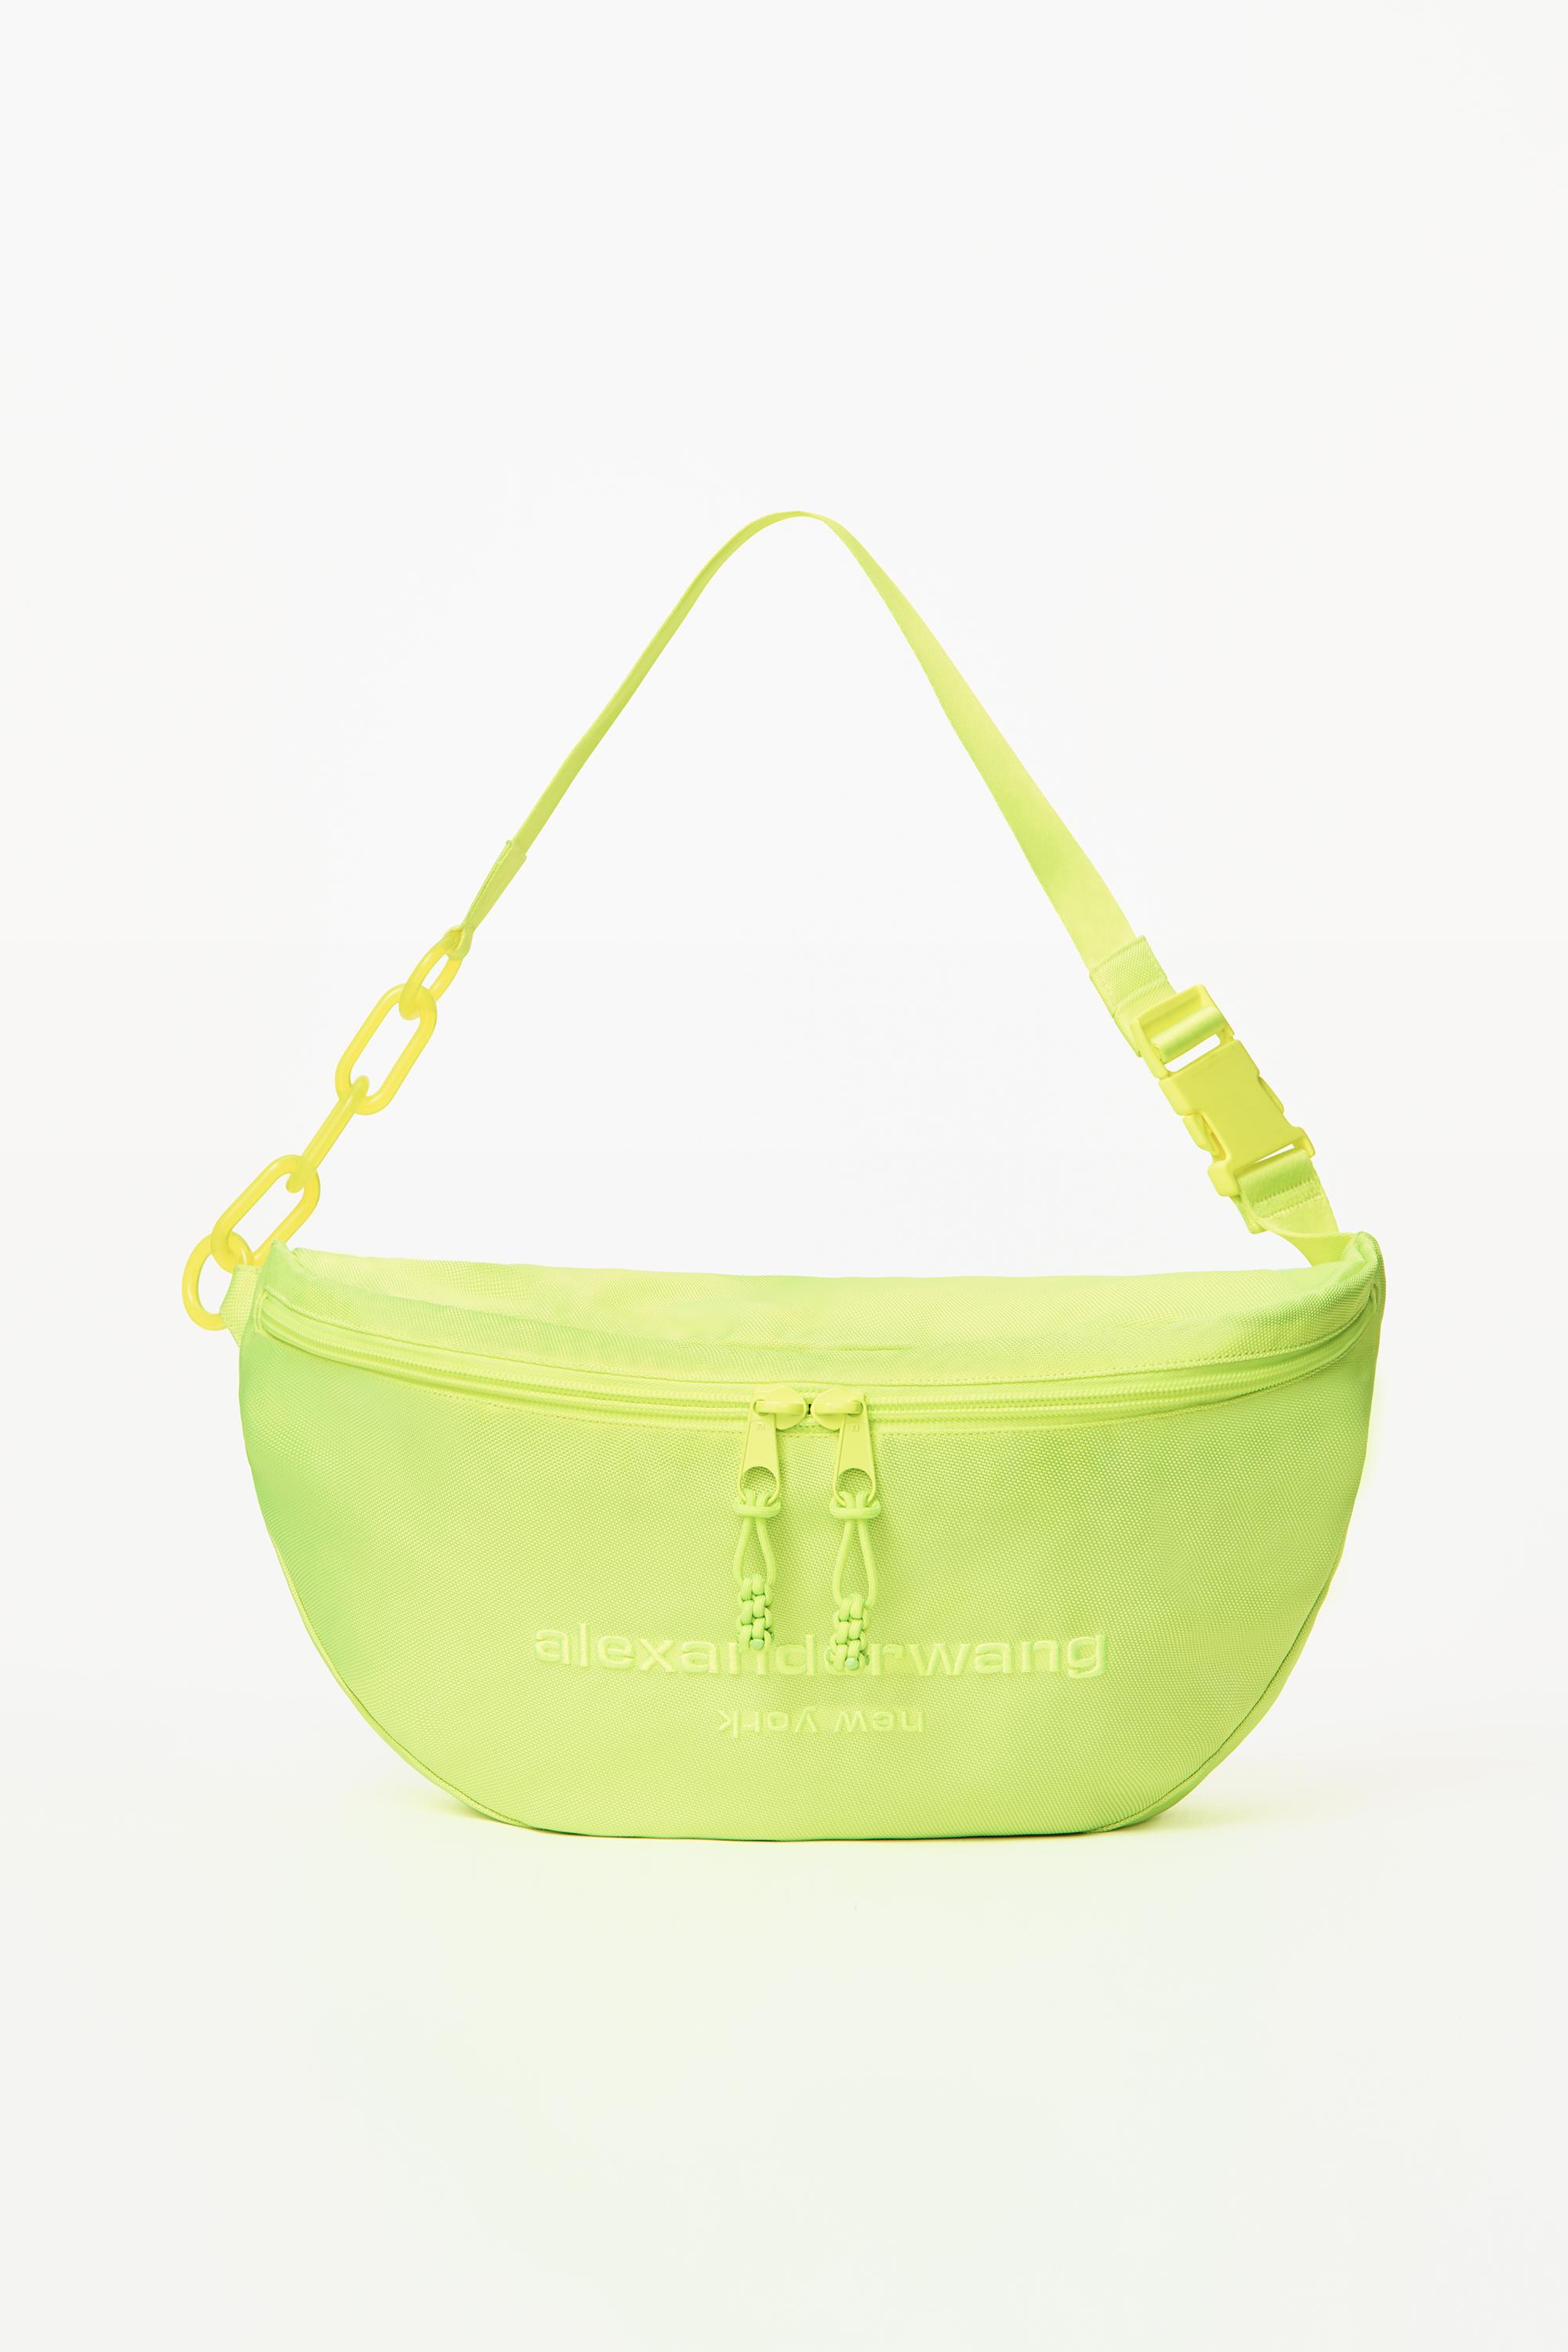 Alexander Wang Synthetic Primal Large Nylon Fanny Pack in Yellow 